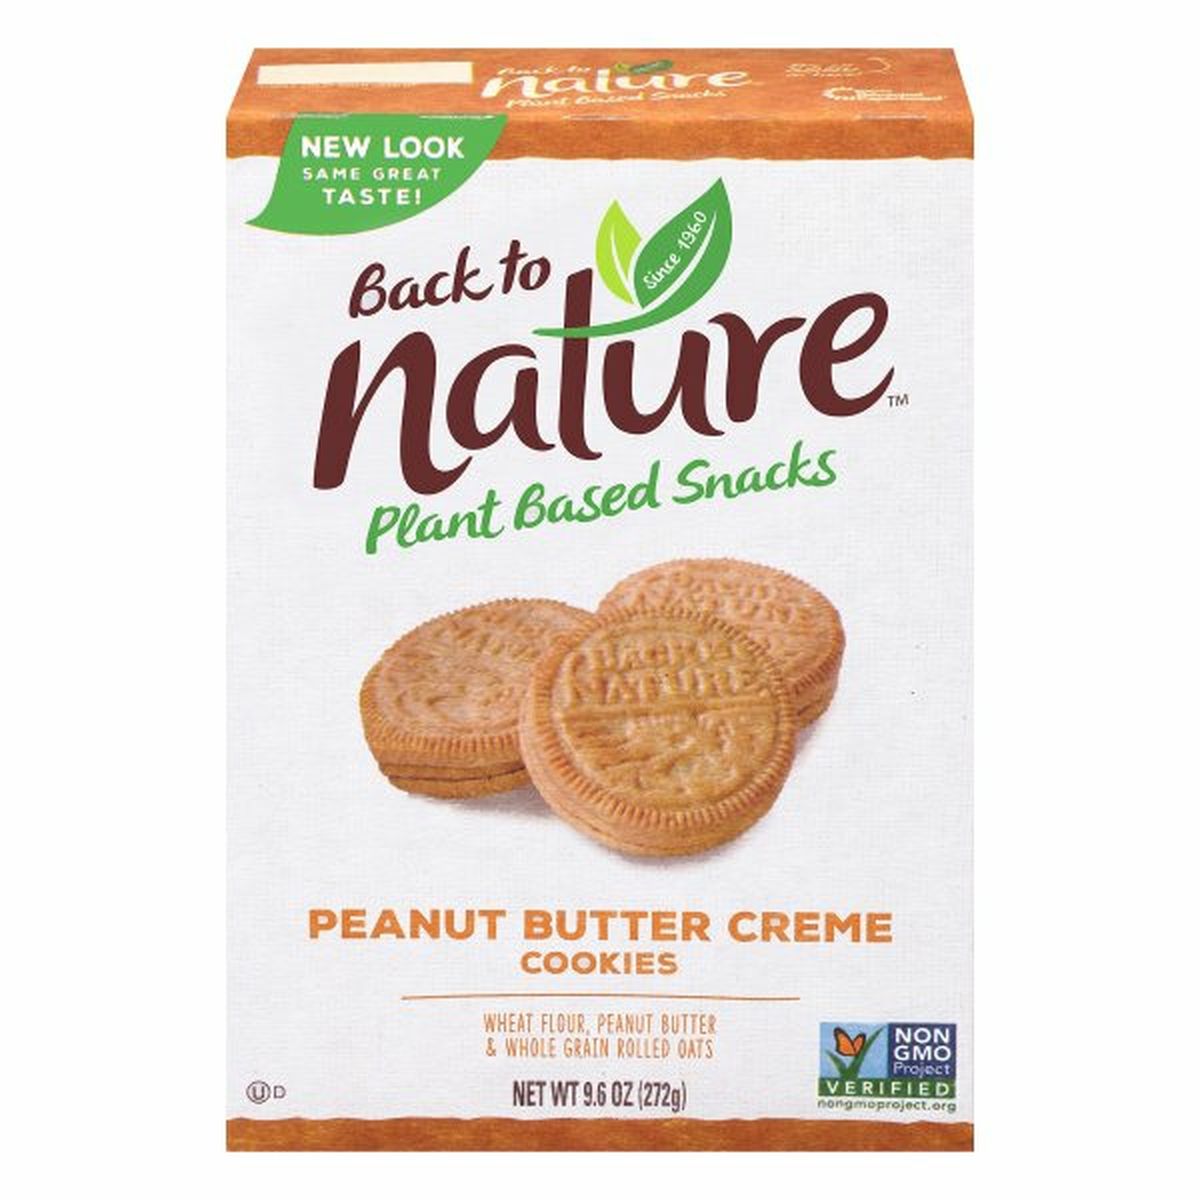 Calories in Back to Nature Cookies, Peanut Butter Creme